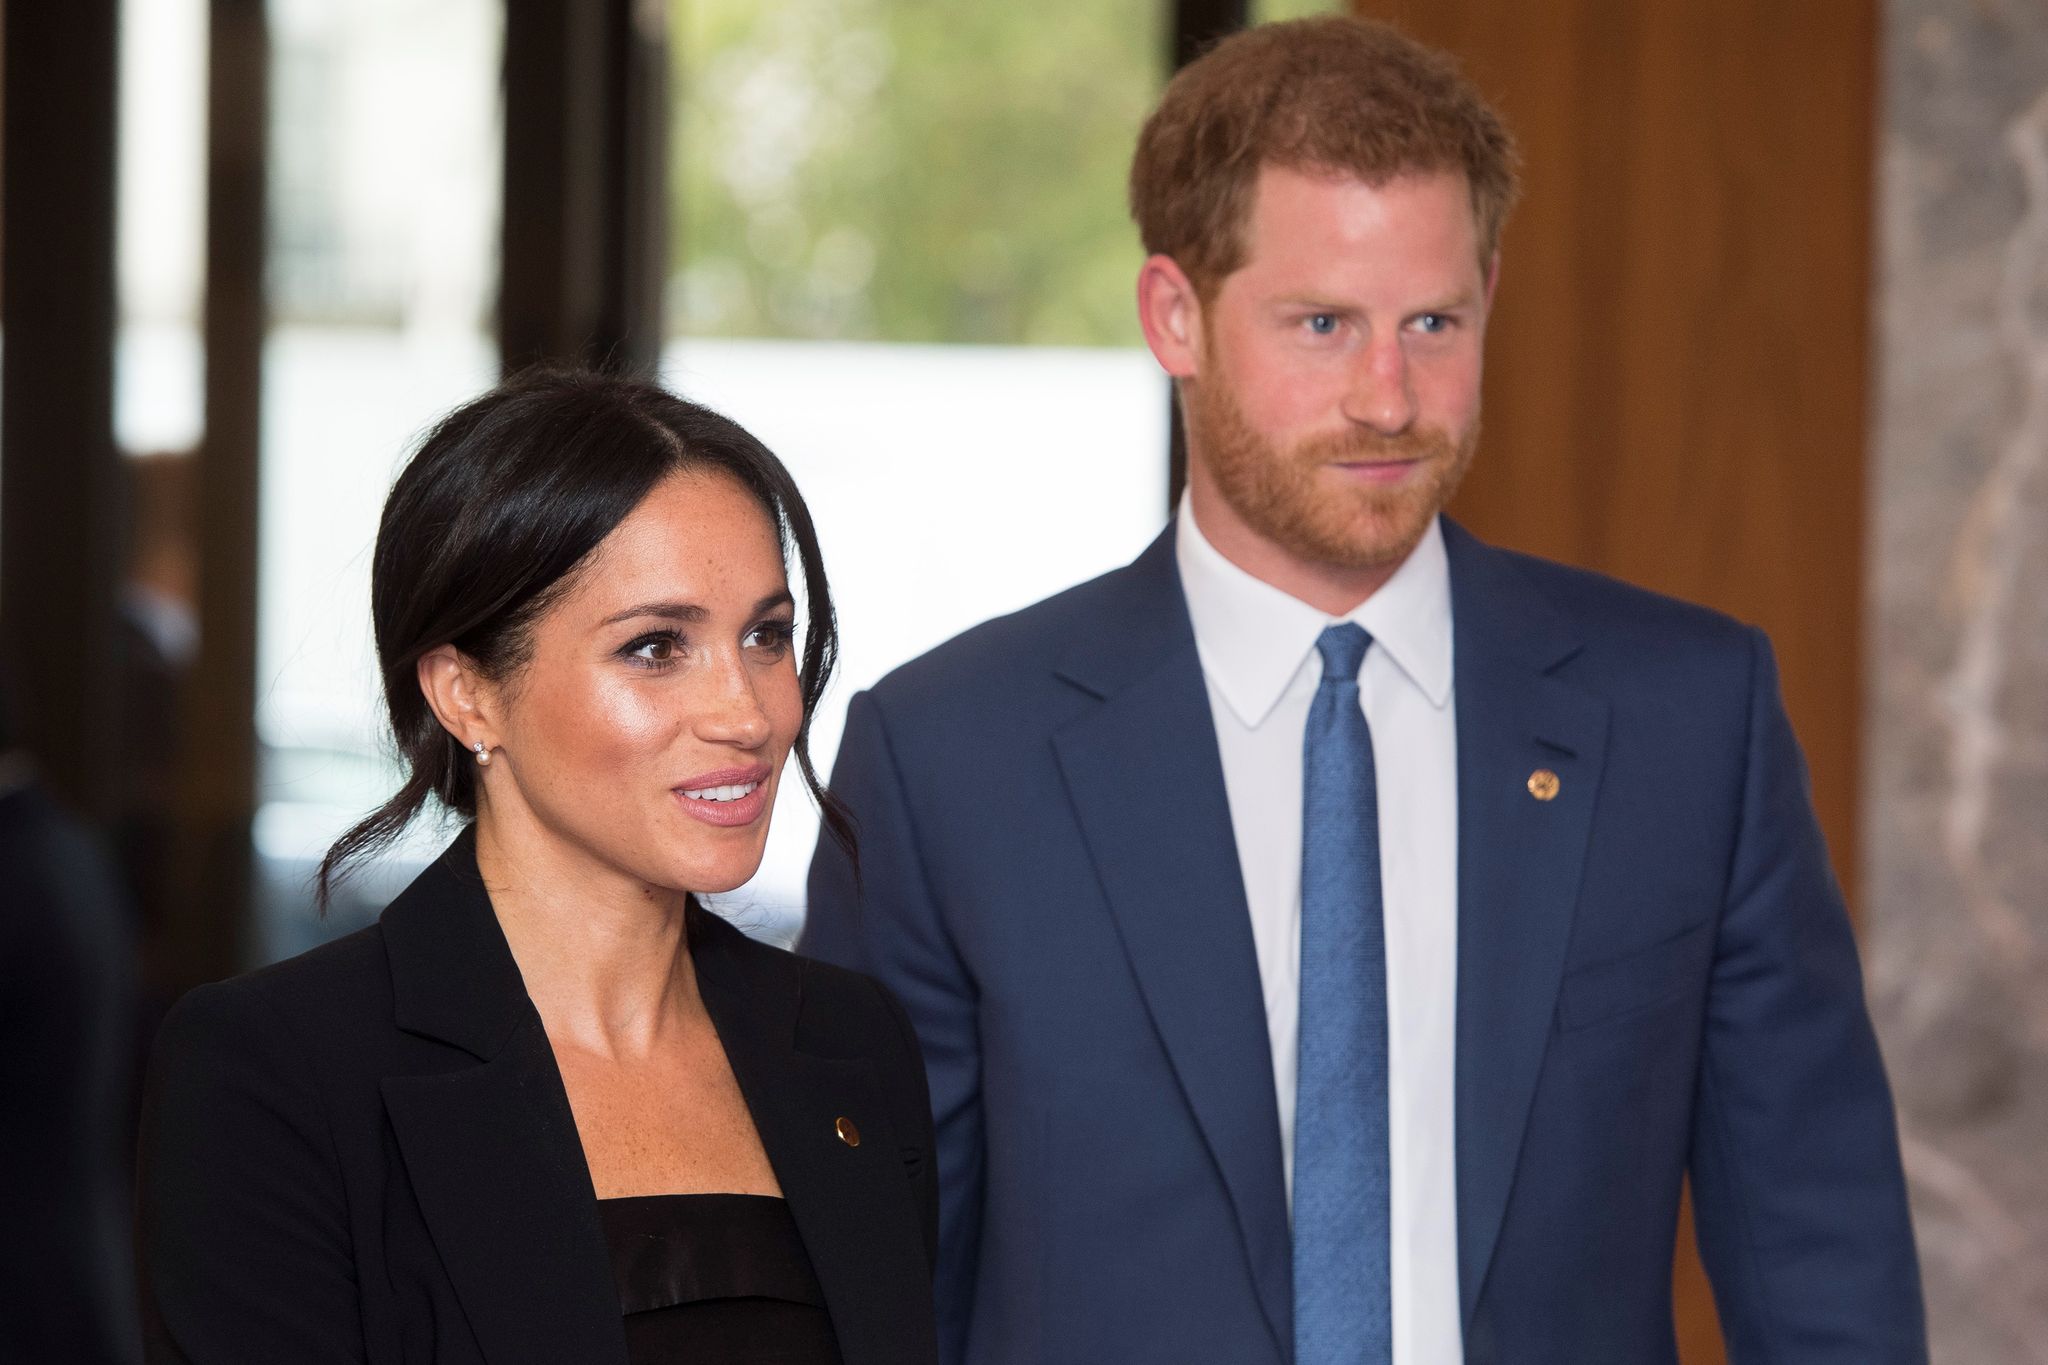 Meghan Markle wearing a black coat and Prince Harry wearing a blue coat